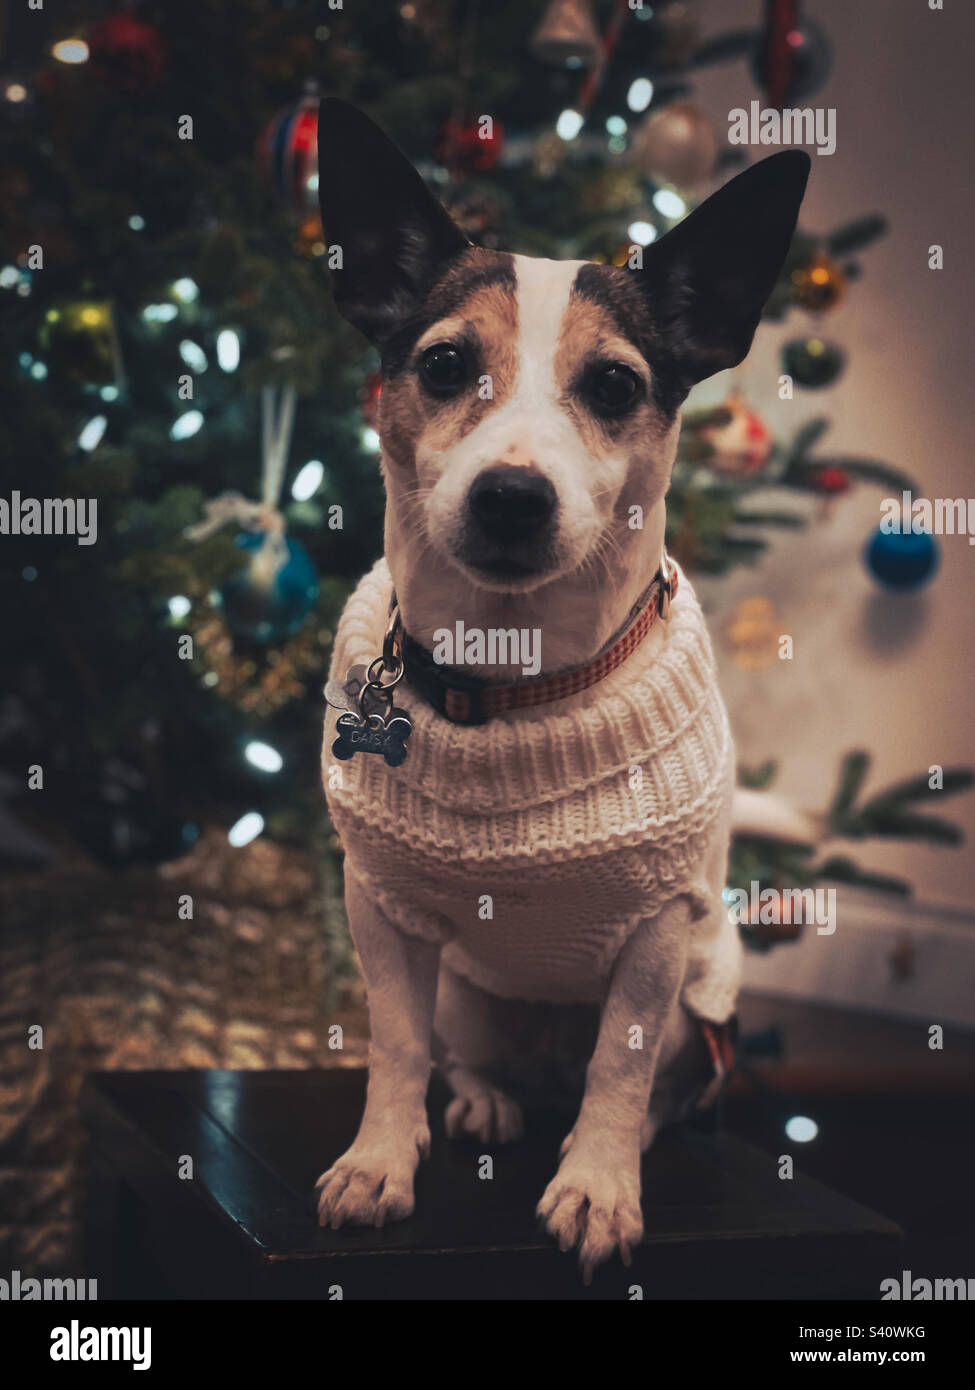 Jack Russell Terrier dog wearing a sweater sitting in front of Christmas tree looking at camera. Stock Photo